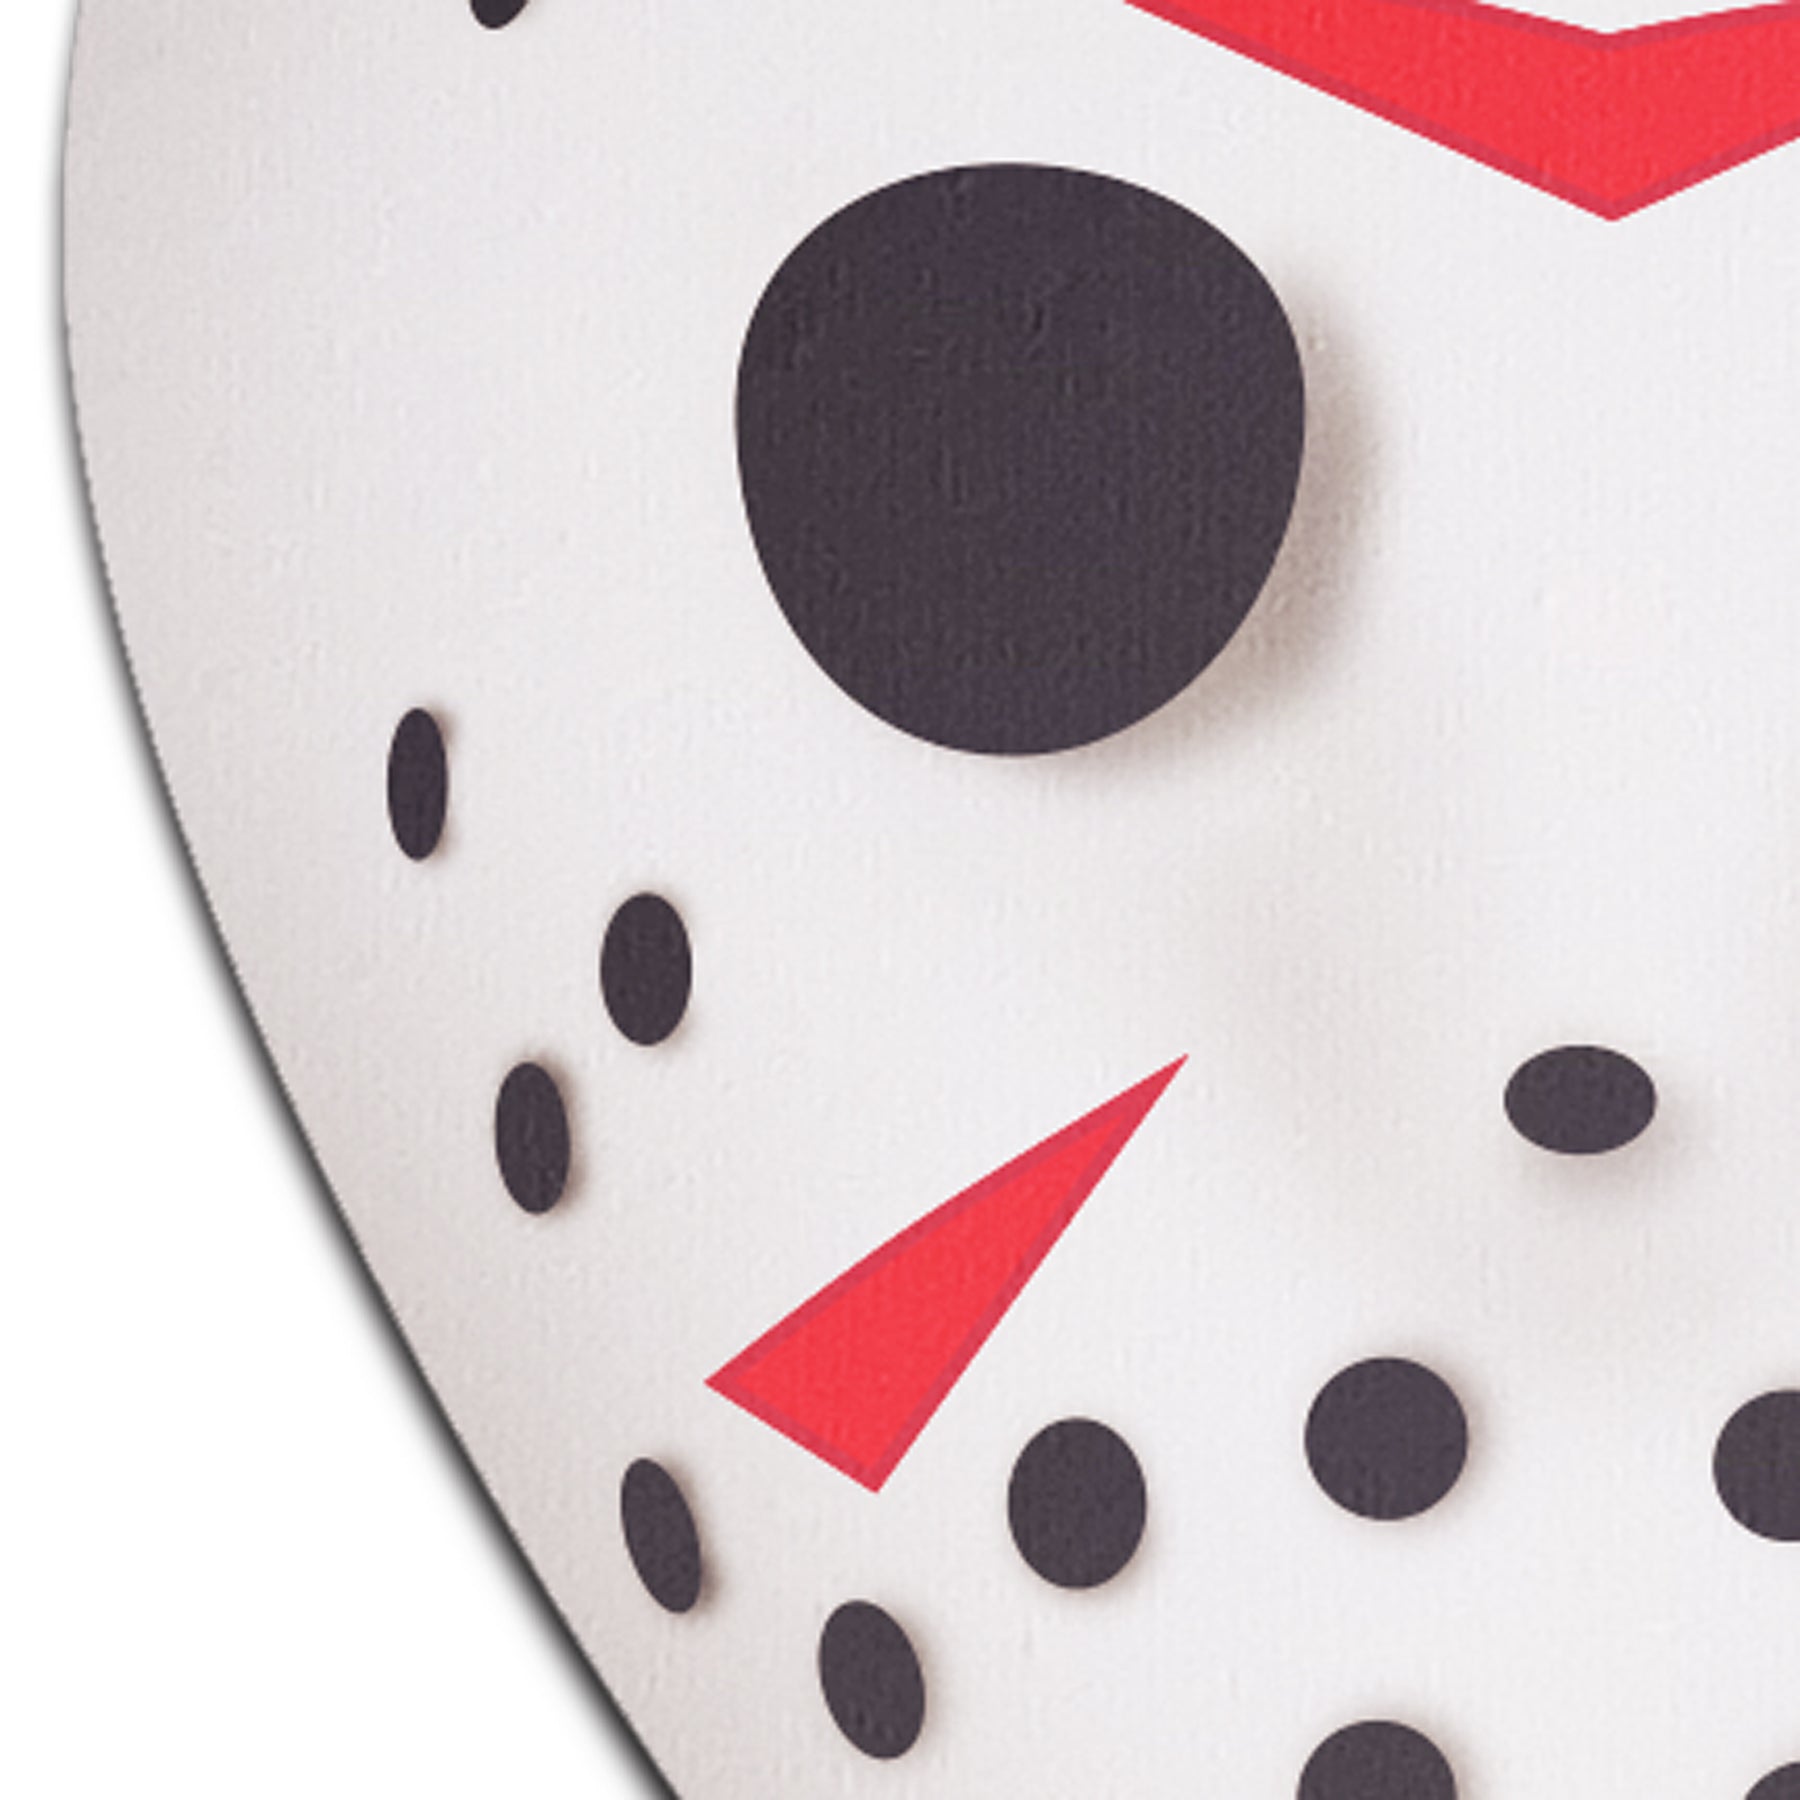 Scary Halloween Hockey Mask Nipple Pasties by Pastease®